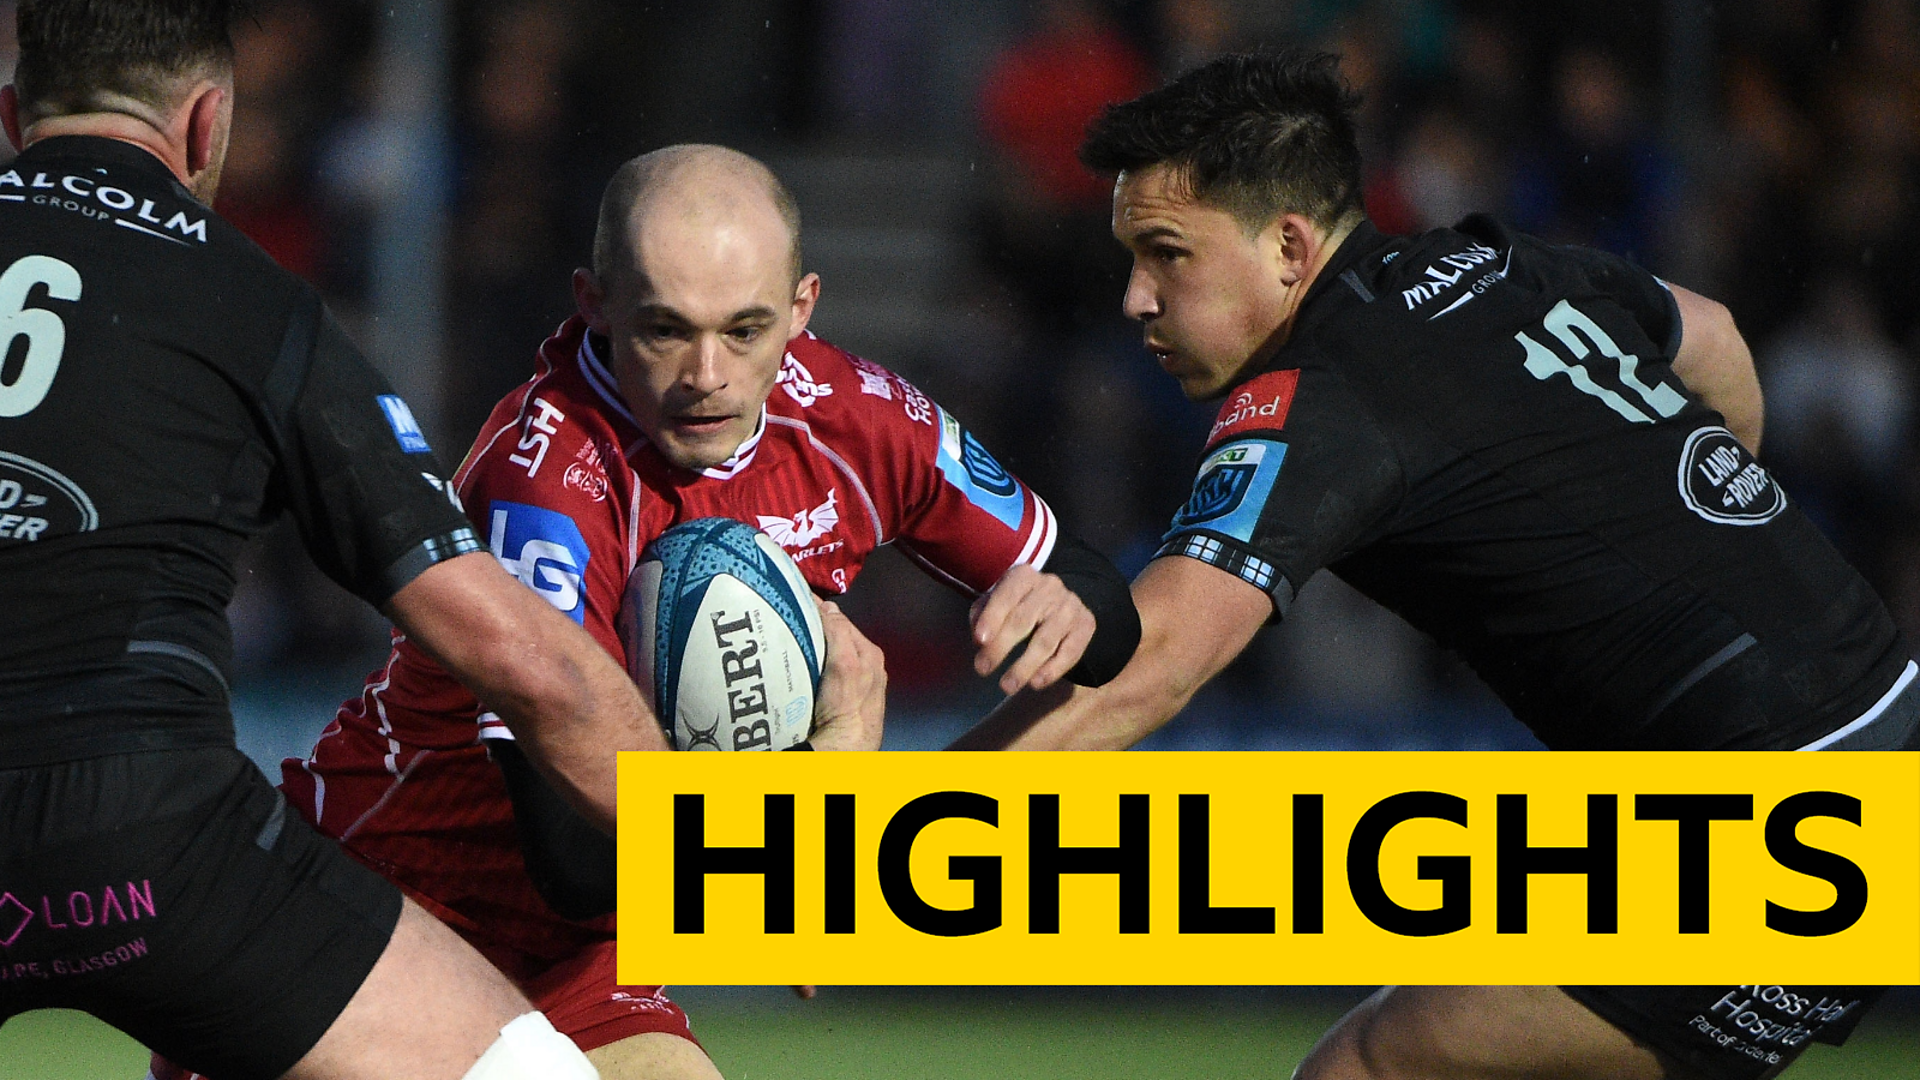 United Rugby Championship highlights Glasgow Warriors 12-9 Scarlets